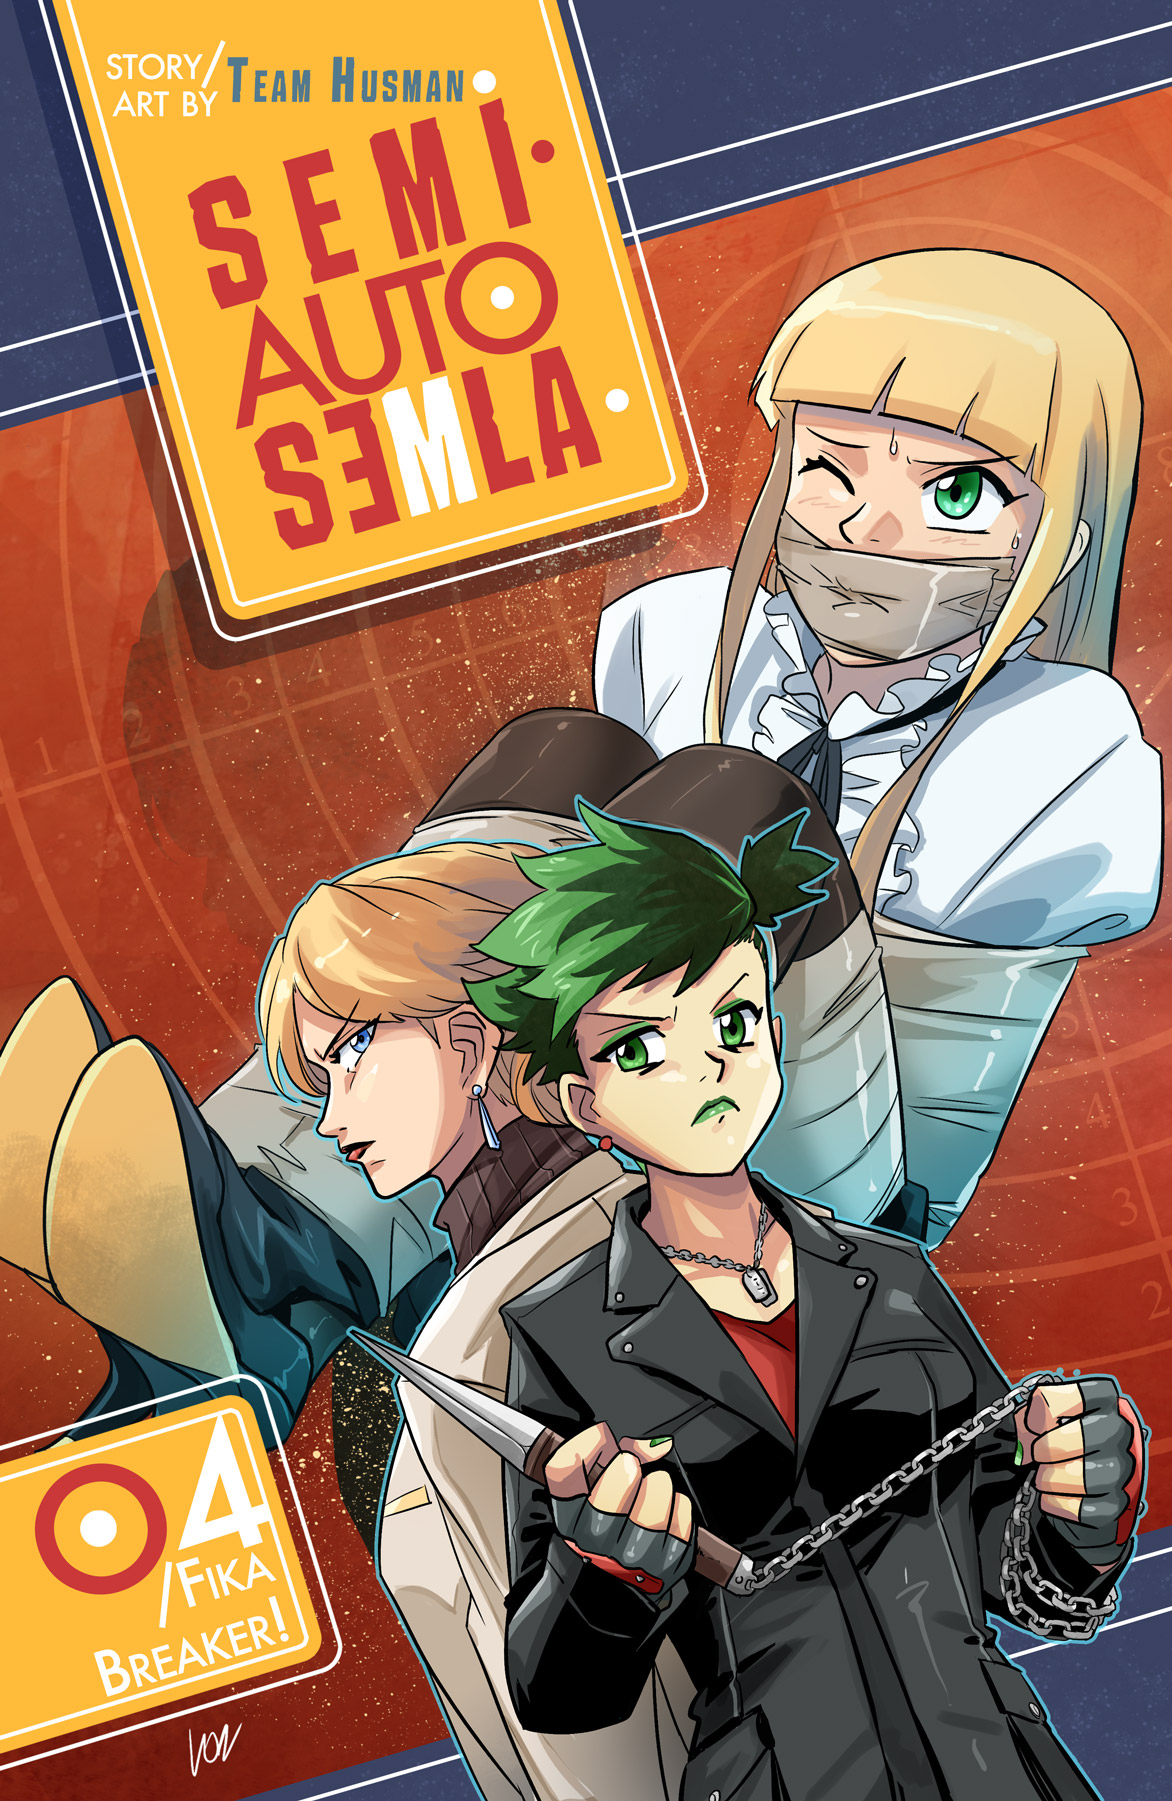 Chapter 4 Cover